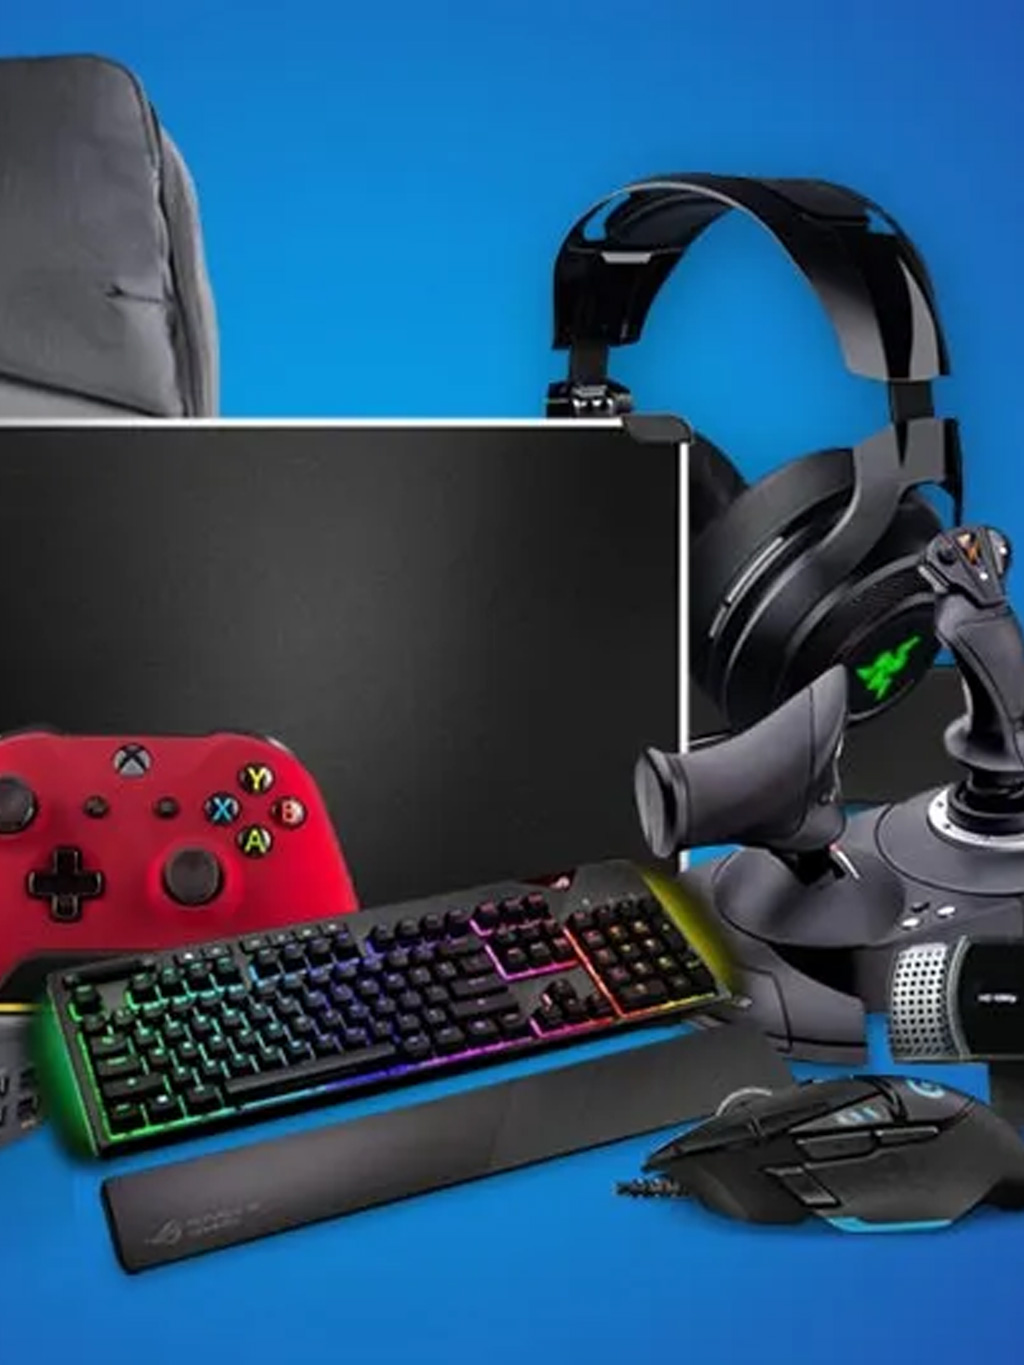 Gaming Gadgets: A Look at the Hottest Accessories - Tech Insight